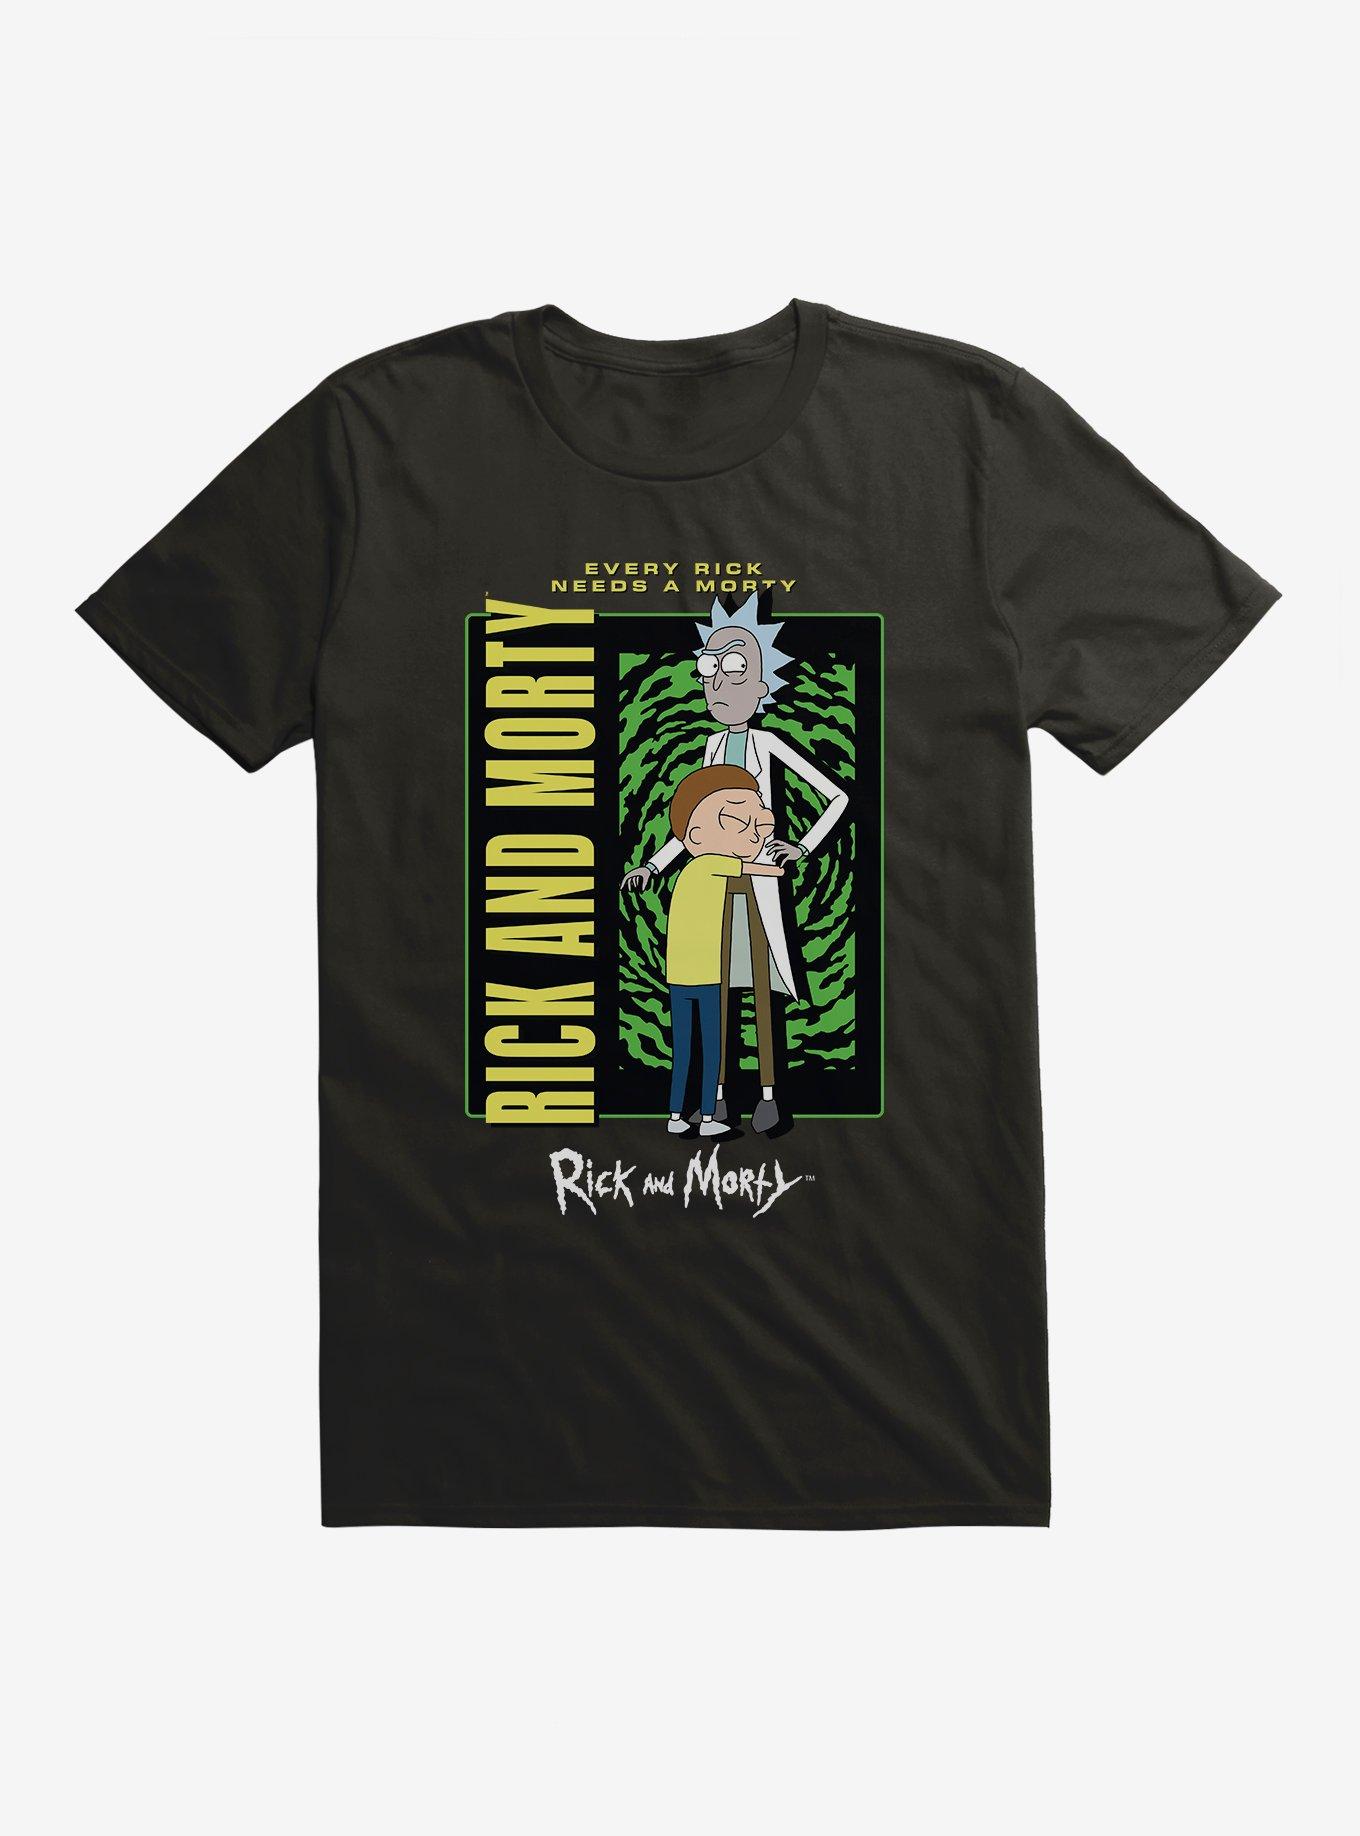 Rick And Morty Needs A T-Shirt